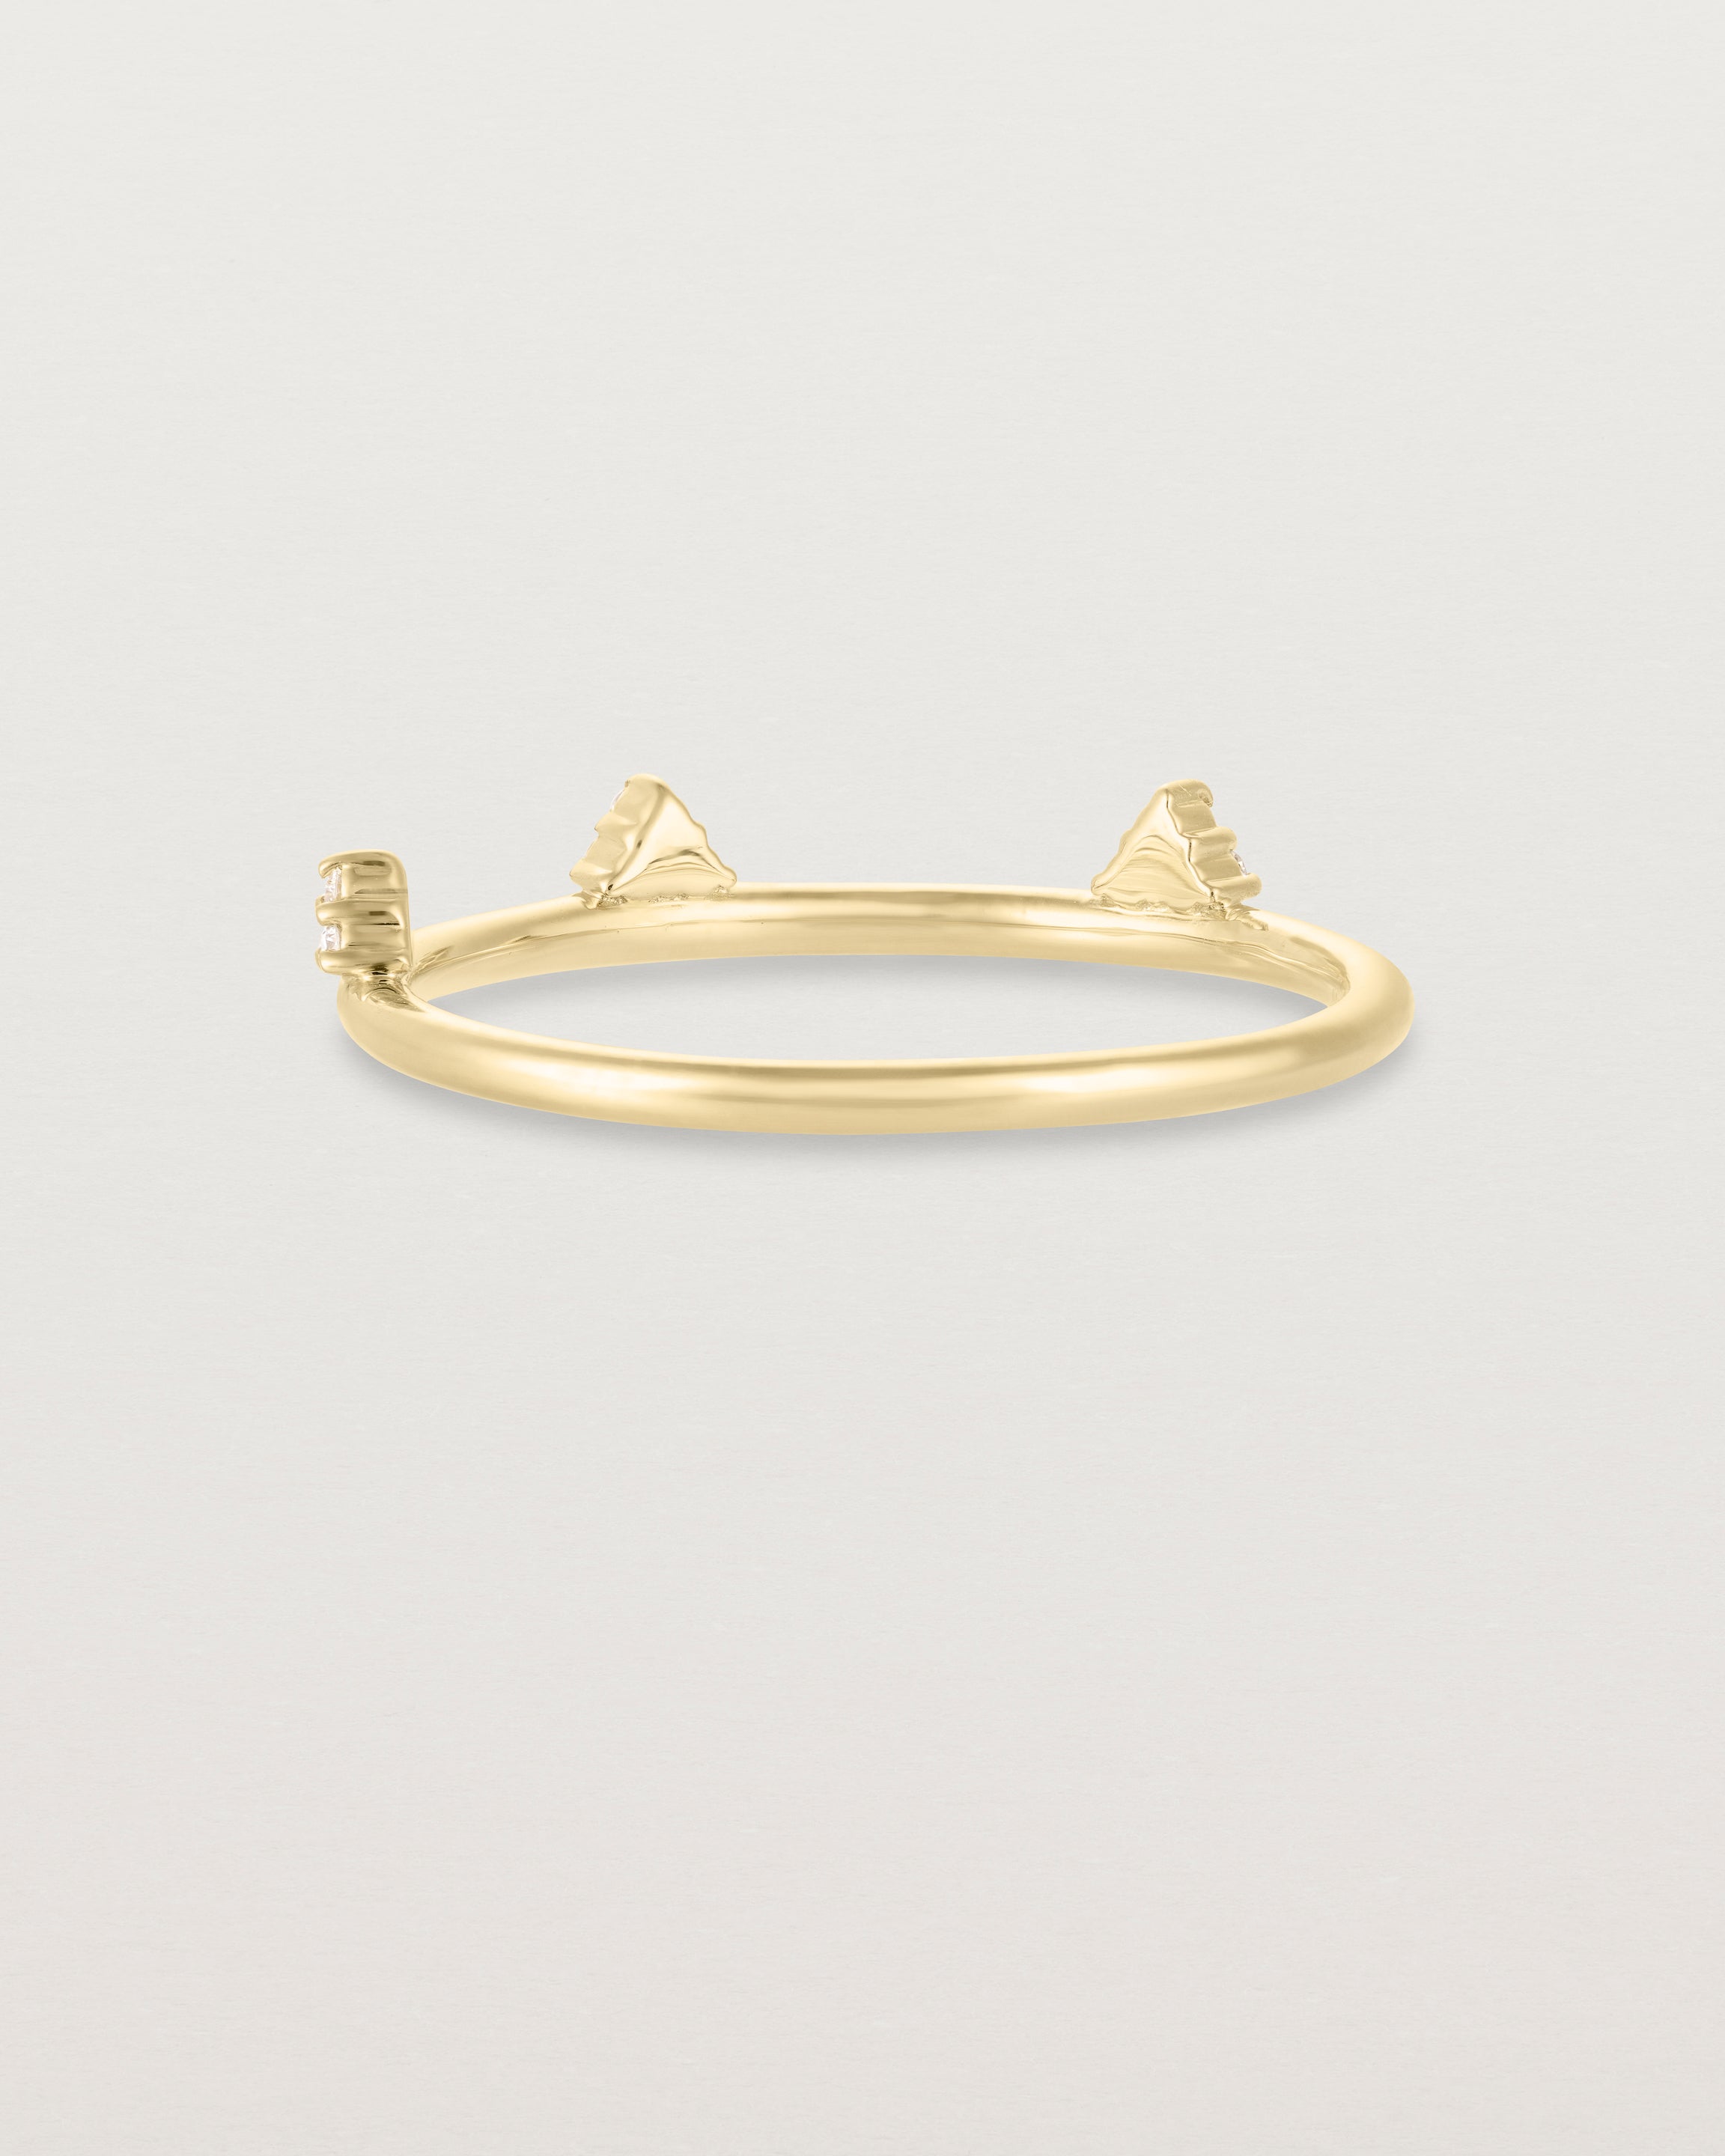 Back view of the Belle Ring | Diamonds in yellow gold.